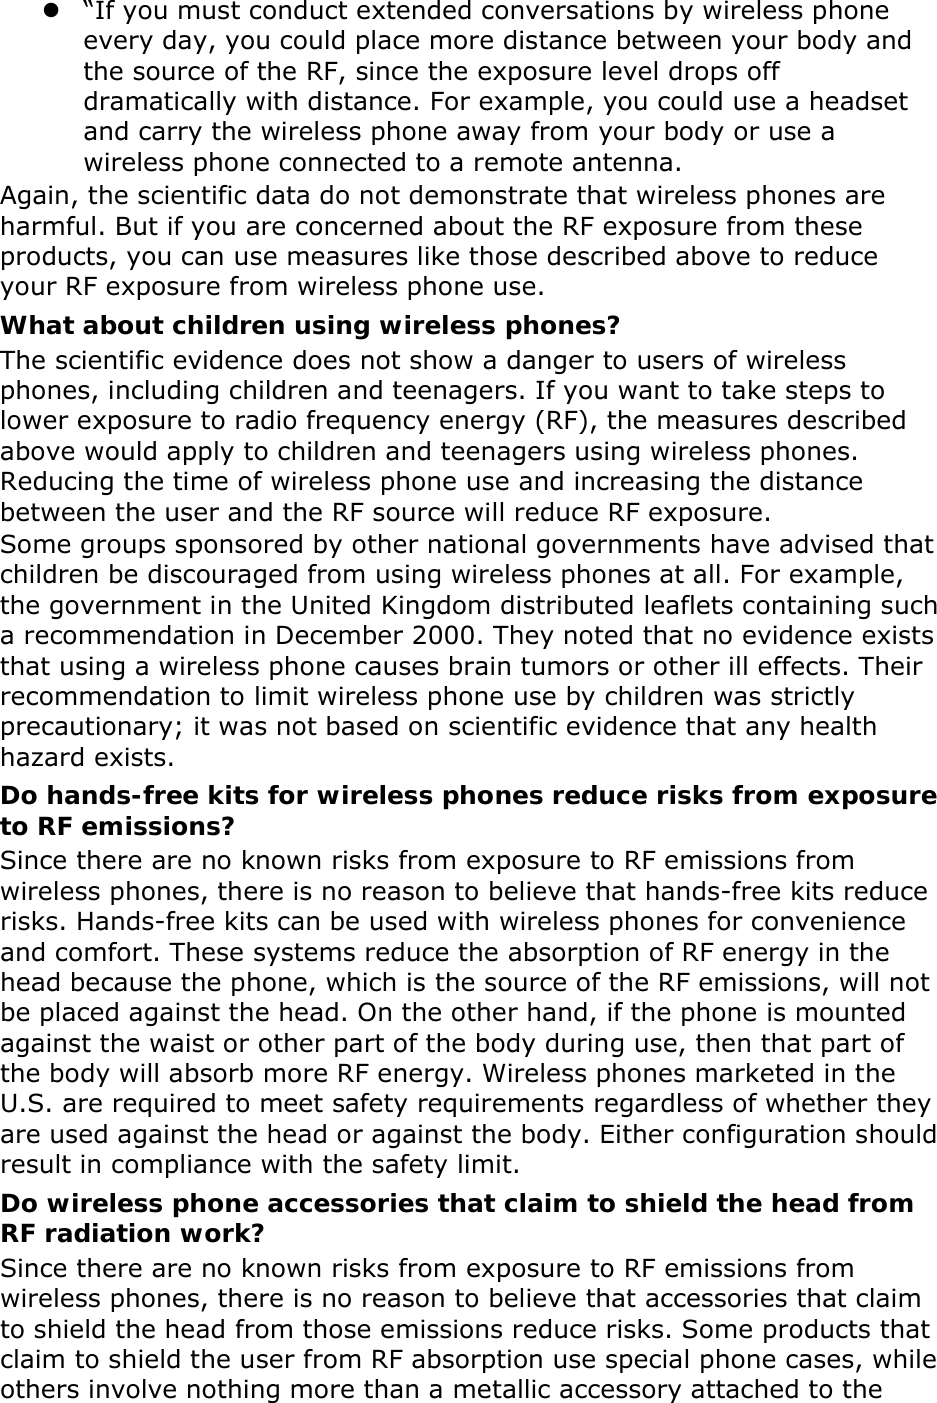  “If you must conduct extended conversations by wireless phone every day, you could place more distance between your body and the source of the RF, since the exposure level drops off dramatically with distance. For example, you could use a headset and carry the wireless phone away from your body or use a wireless phone connected to a remote antenna. Again, the scientific data do not demonstrate that wireless phones are harmful. But if you are concerned about the RF exposure from these products, you can use measures like those described above to reduce your RF exposure from wireless phone use. What about children using wireless phones? The scientific evidence does not show a danger to users of wireless phones, including children and teenagers. If you want to take steps to lower exposure to radio frequency energy (RF), the measures described above would apply to children and teenagers using wireless phones. Reducing the time of wireless phone use and increasing the distance between the user and the RF source will reduce RF exposure. Some groups sponsored by other national governments have advised that children be discouraged from using wireless phones at all. For example, the government in the United Kingdom distributed leaflets containing such a recommendation in December 2000. They noted that no evidence exists that using a wireless phone causes brain tumors or other ill effects. Their recommendation to limit wireless phone use by children was strictly precautionary; it was not based on scientific evidence that any health hazard exists.   Do hands-free kits for wireless phones reduce risks from exposure to RF emissions? Since there are no known risks from exposure to RF emissions from wireless phones, there is no reason to believe that hands-free kits reduce risks. Hands-free kits can be used with wireless phones for convenience and comfort. These systems reduce the absorption of RF energy in the head because the phone, which is the source of the RF emissions, will not be placed against the head. On the other hand, if the phone is mounted against the waist or other part of the body during use, then that part of the body will absorb more RF energy. Wireless phones marketed in the U.S. are required to meet safety requirements regardless of whether they are used against the head or against the body. Either configuration should result in compliance with the safety limit. Do wireless phone accessories that claim to shield the head from RF radiation work? Since there are no known risks from exposure to RF emissions from wireless phones, there is no reason to believe that accessories that claim to shield the head from those emissions reduce risks. Some products that claim to shield the user from RF absorption use special phone cases, while others involve nothing more than a metallic accessory attached to the 